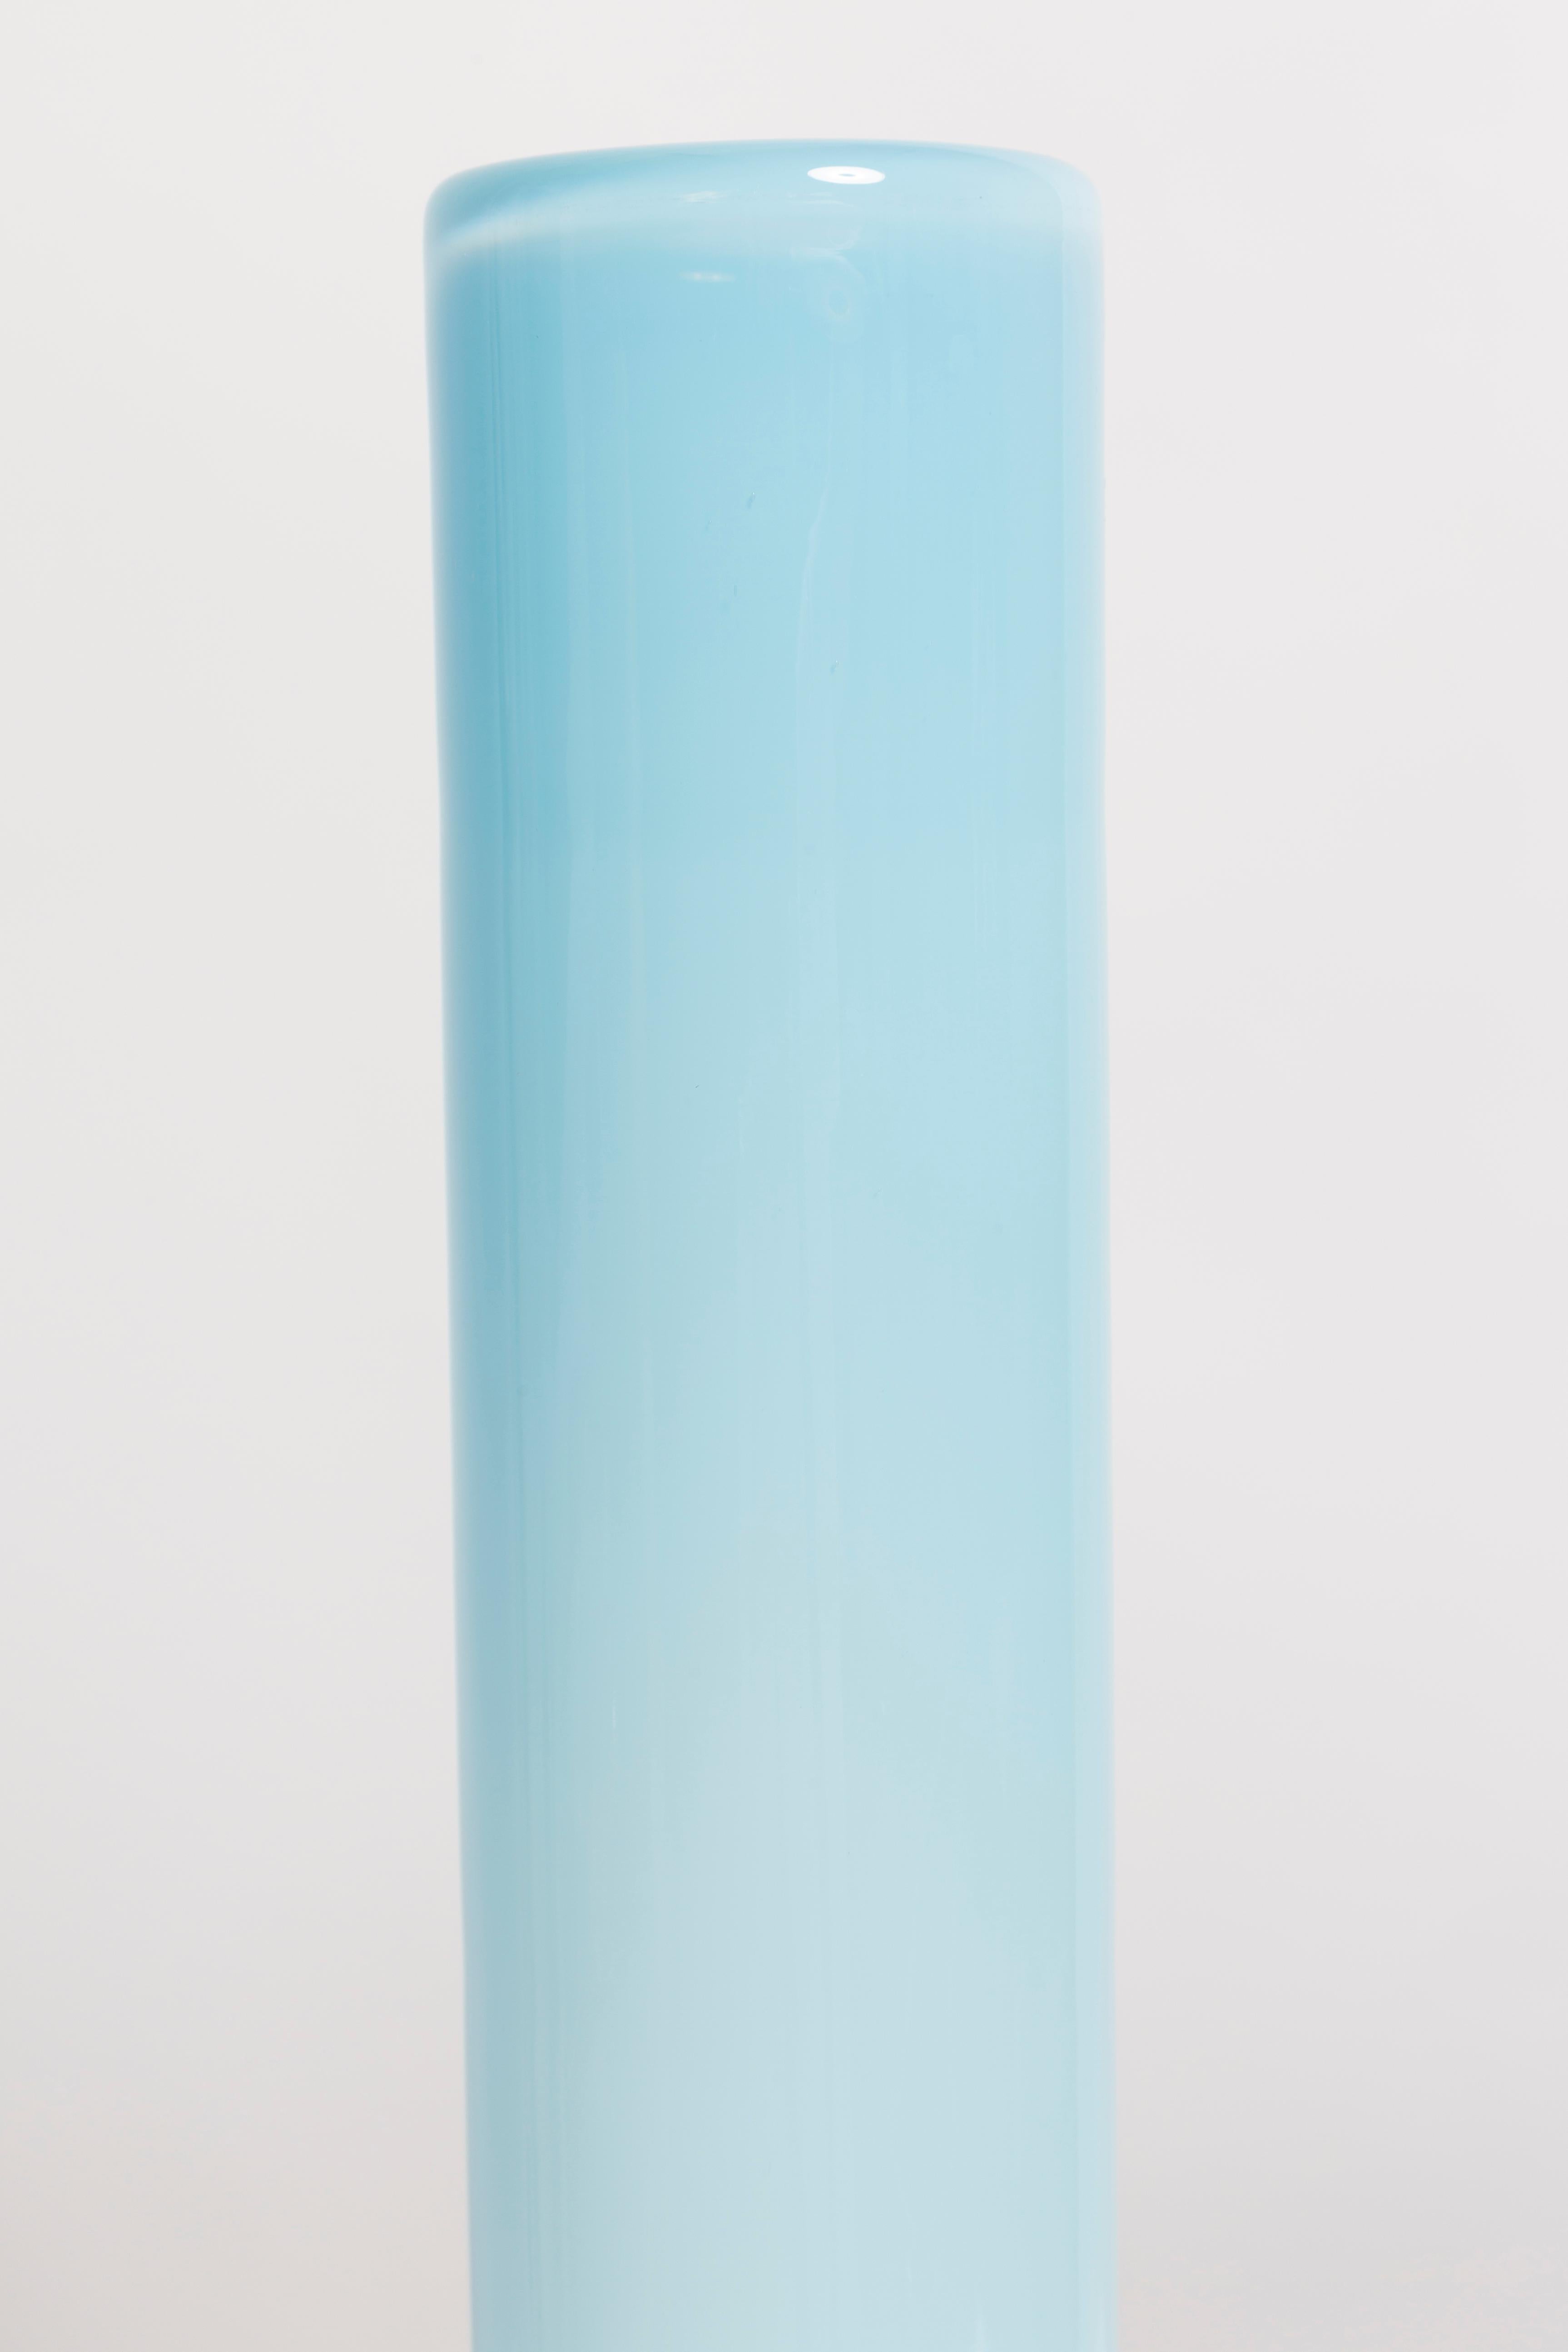 Glass Mid Century Big Vintage Blue and White Ombre Vase, Poland, 1960s For Sale